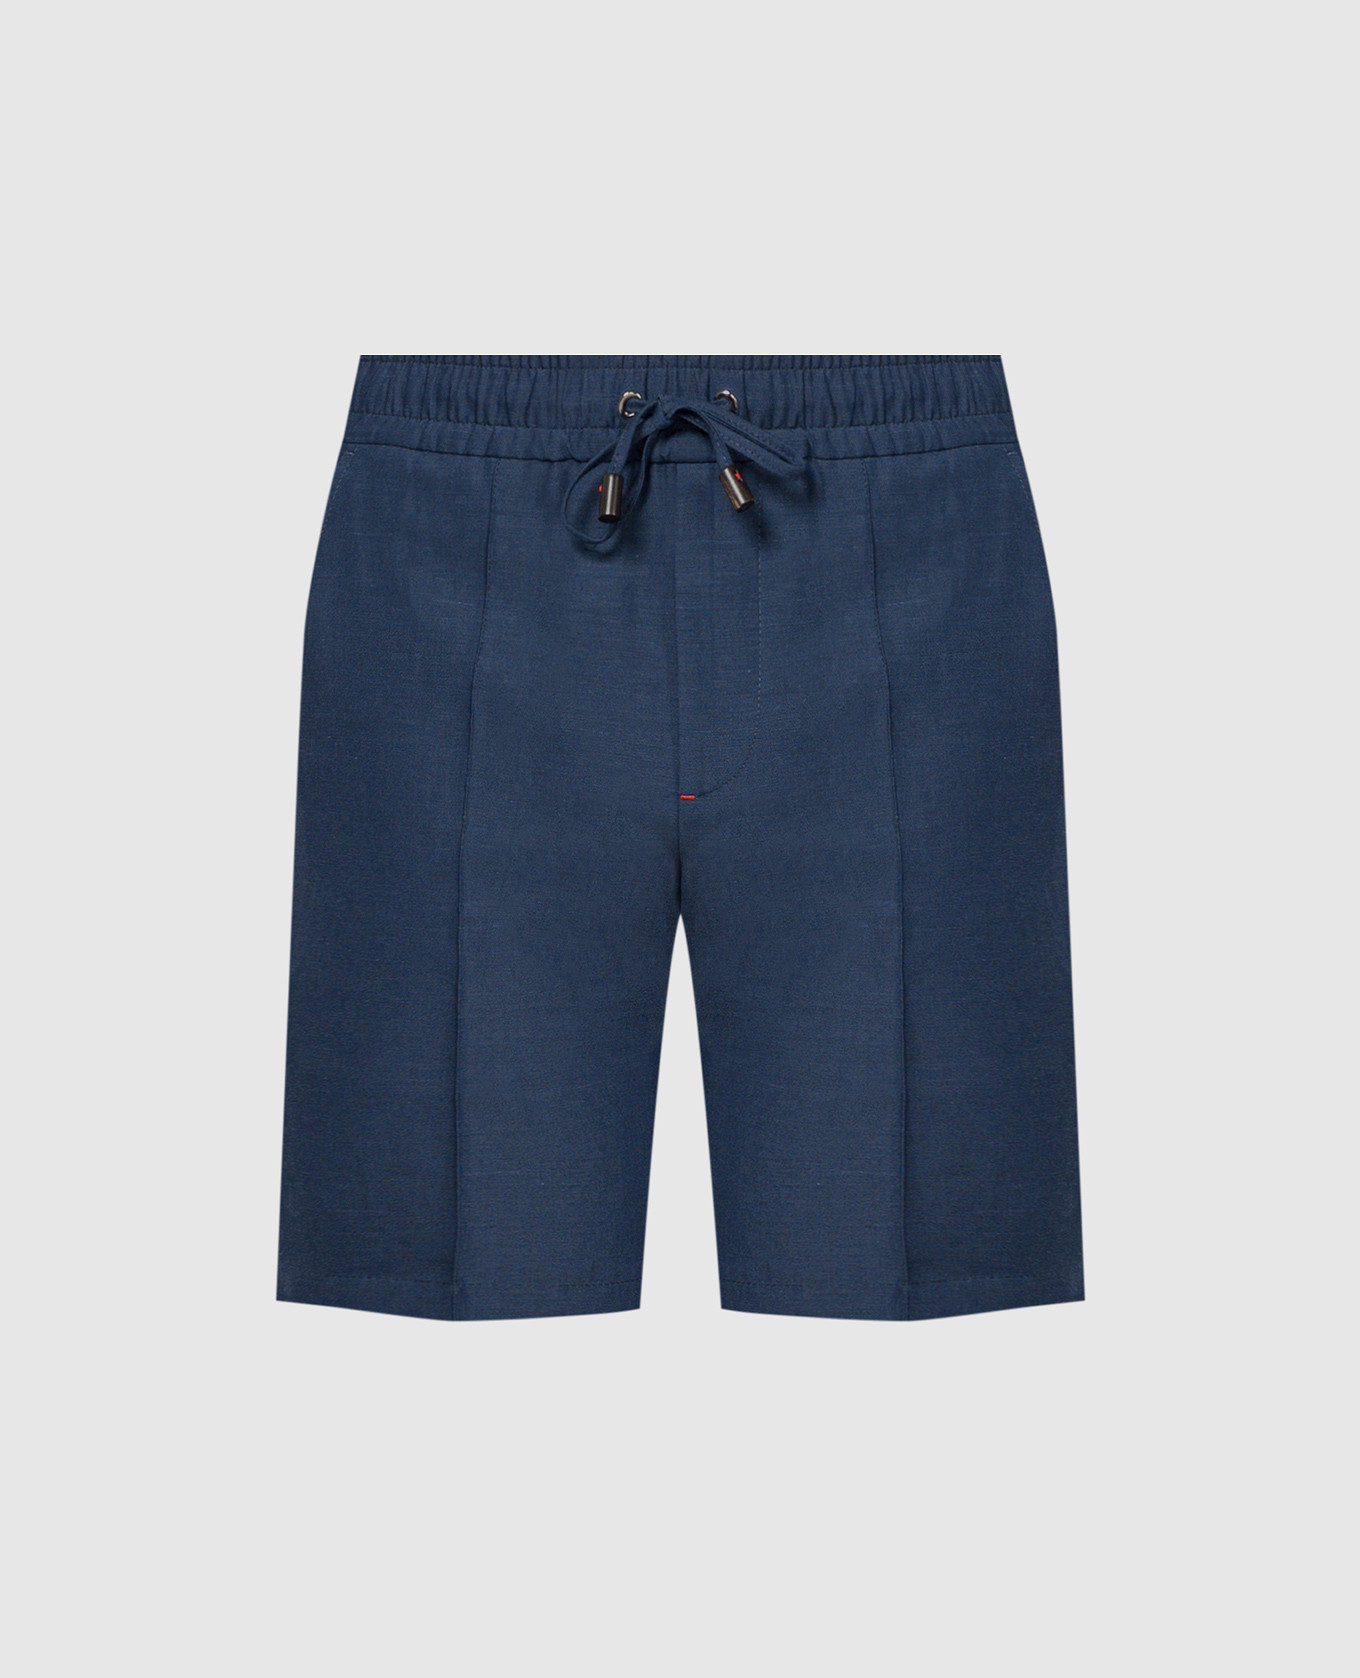 Blue wool and linen shorts with embroidered logo